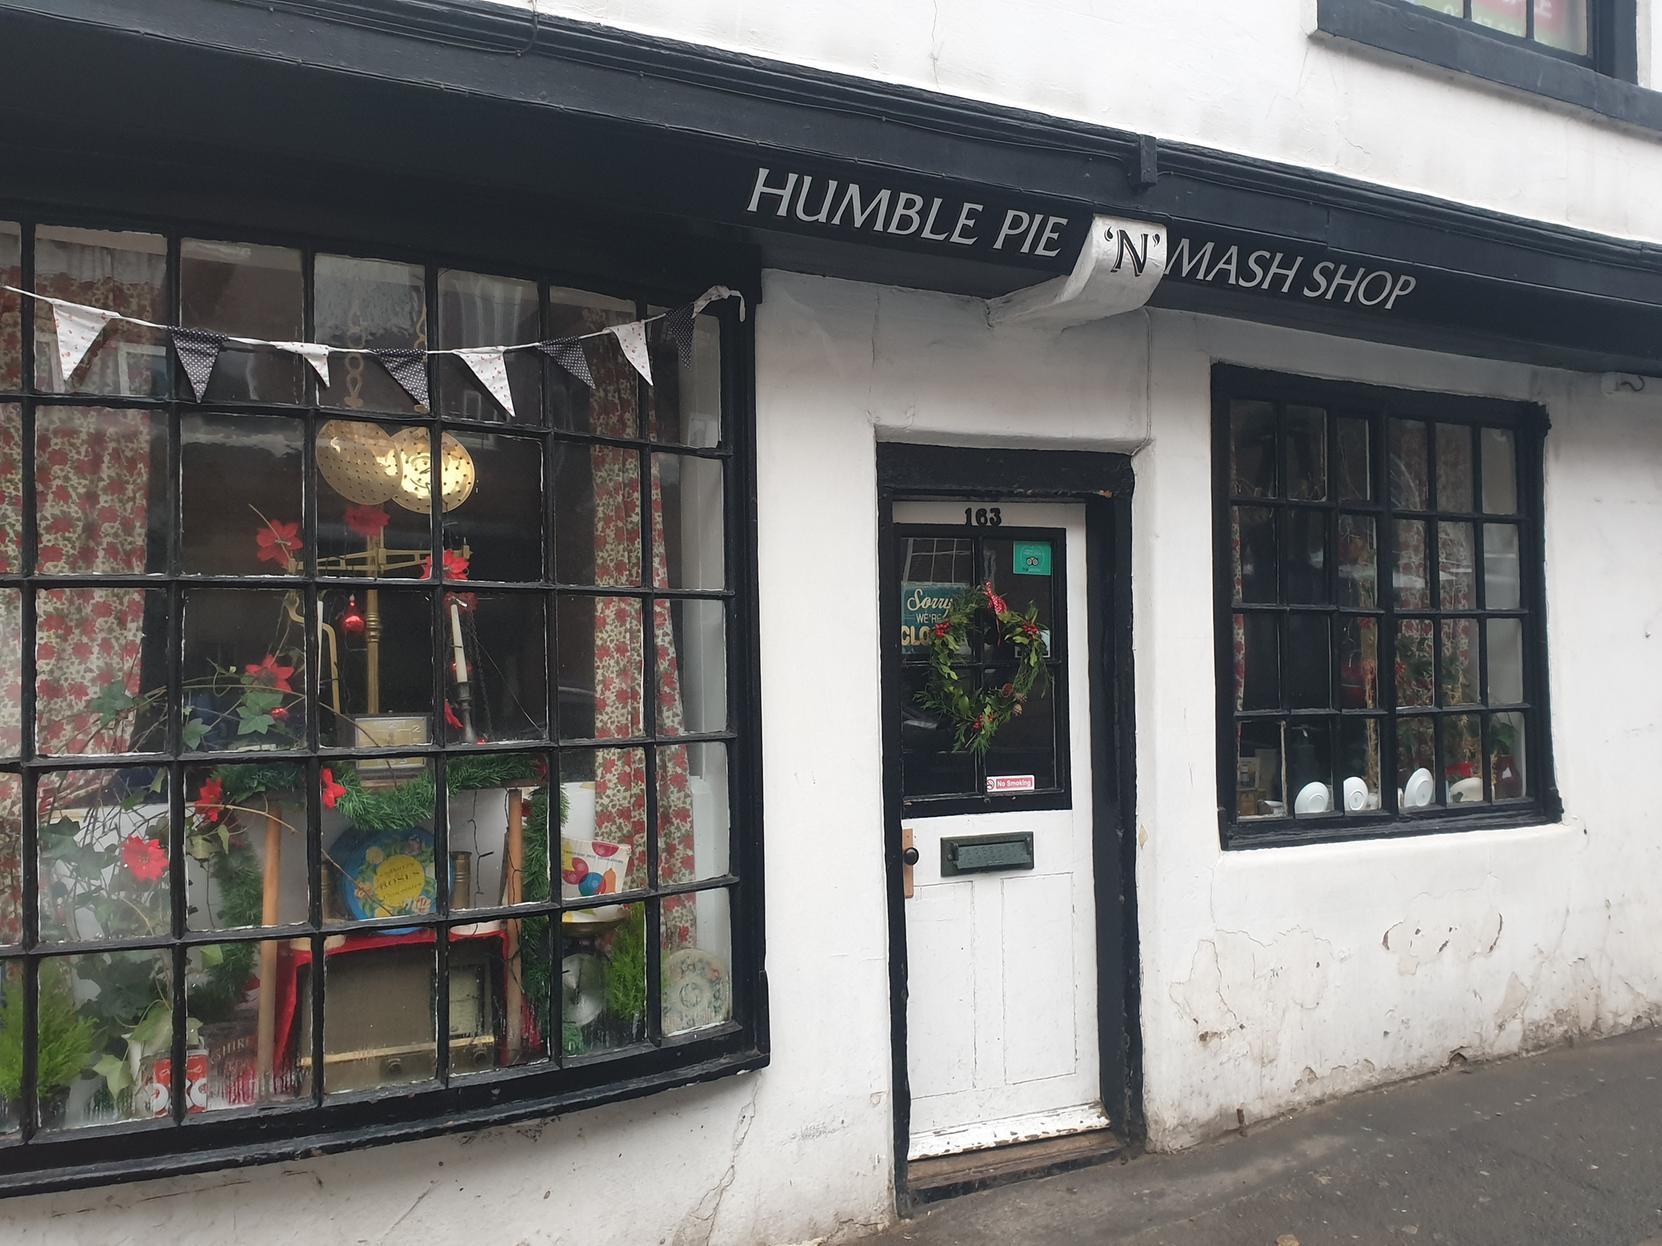 A reviewer said:
Always a really warm welcome, excellent food, cosy place. A great range of pies, excellent quality and great value.